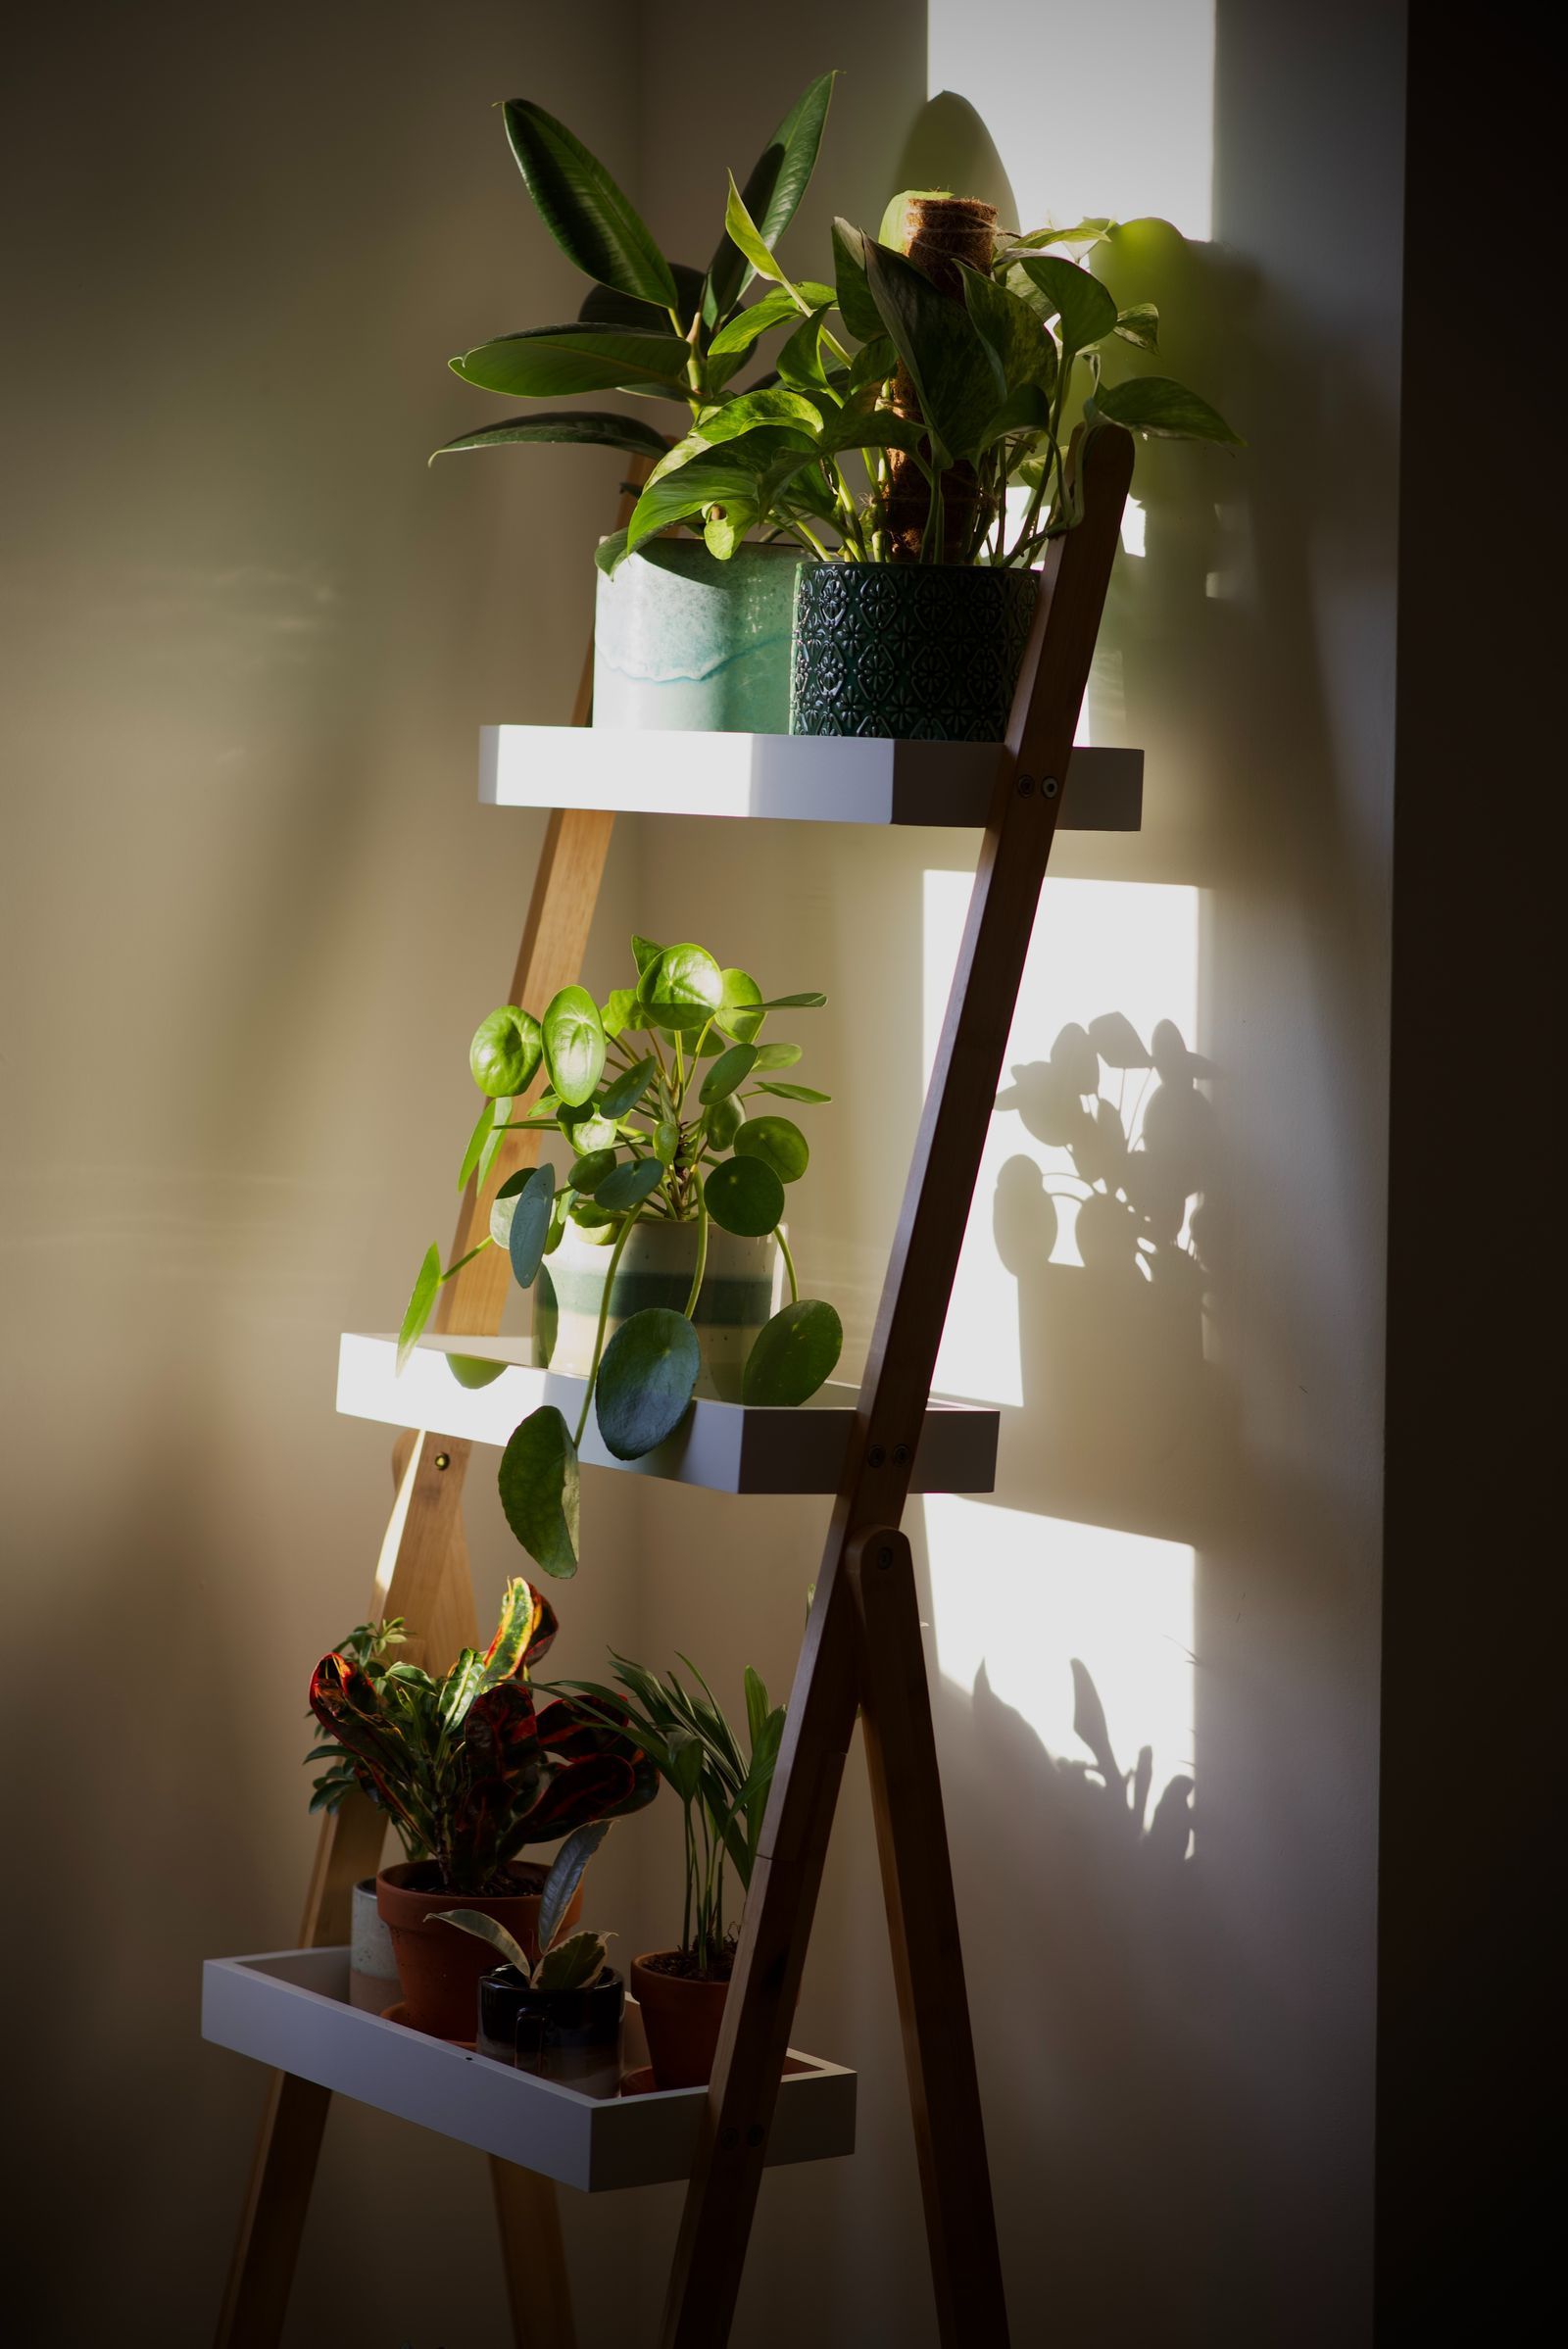 A ladder shelving unit with four different houseplants